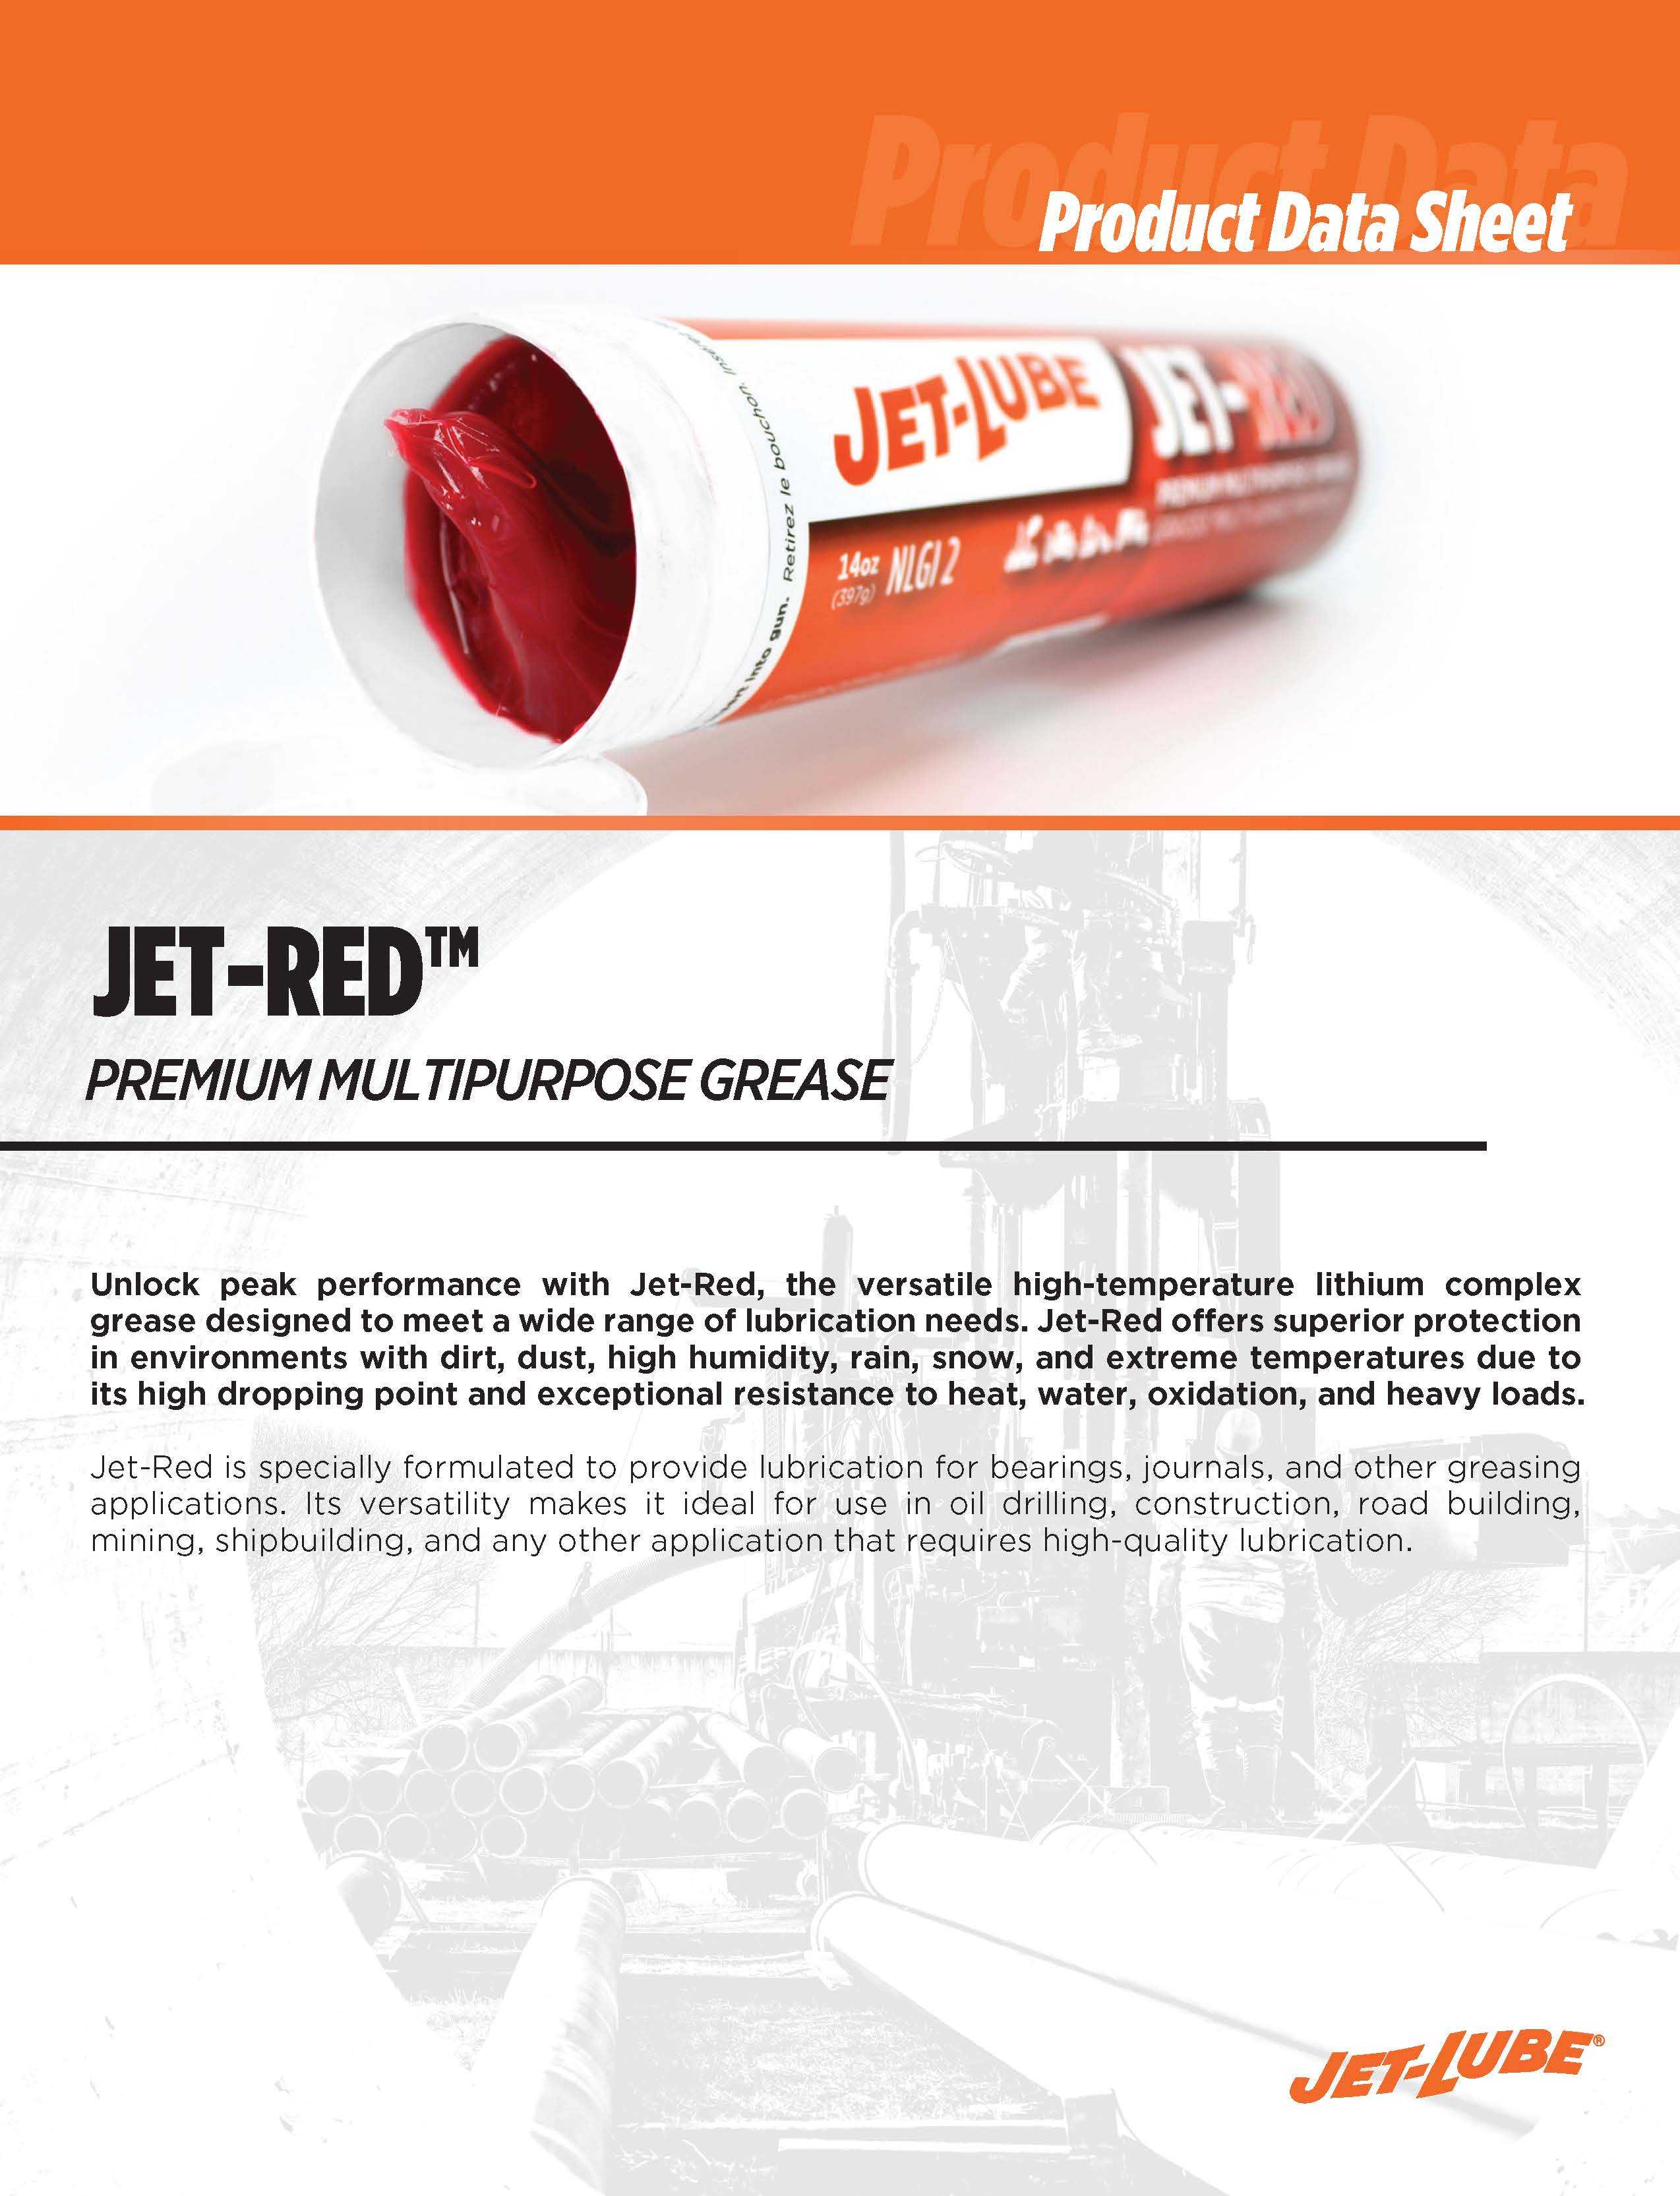 PDS_Jet-Red_English